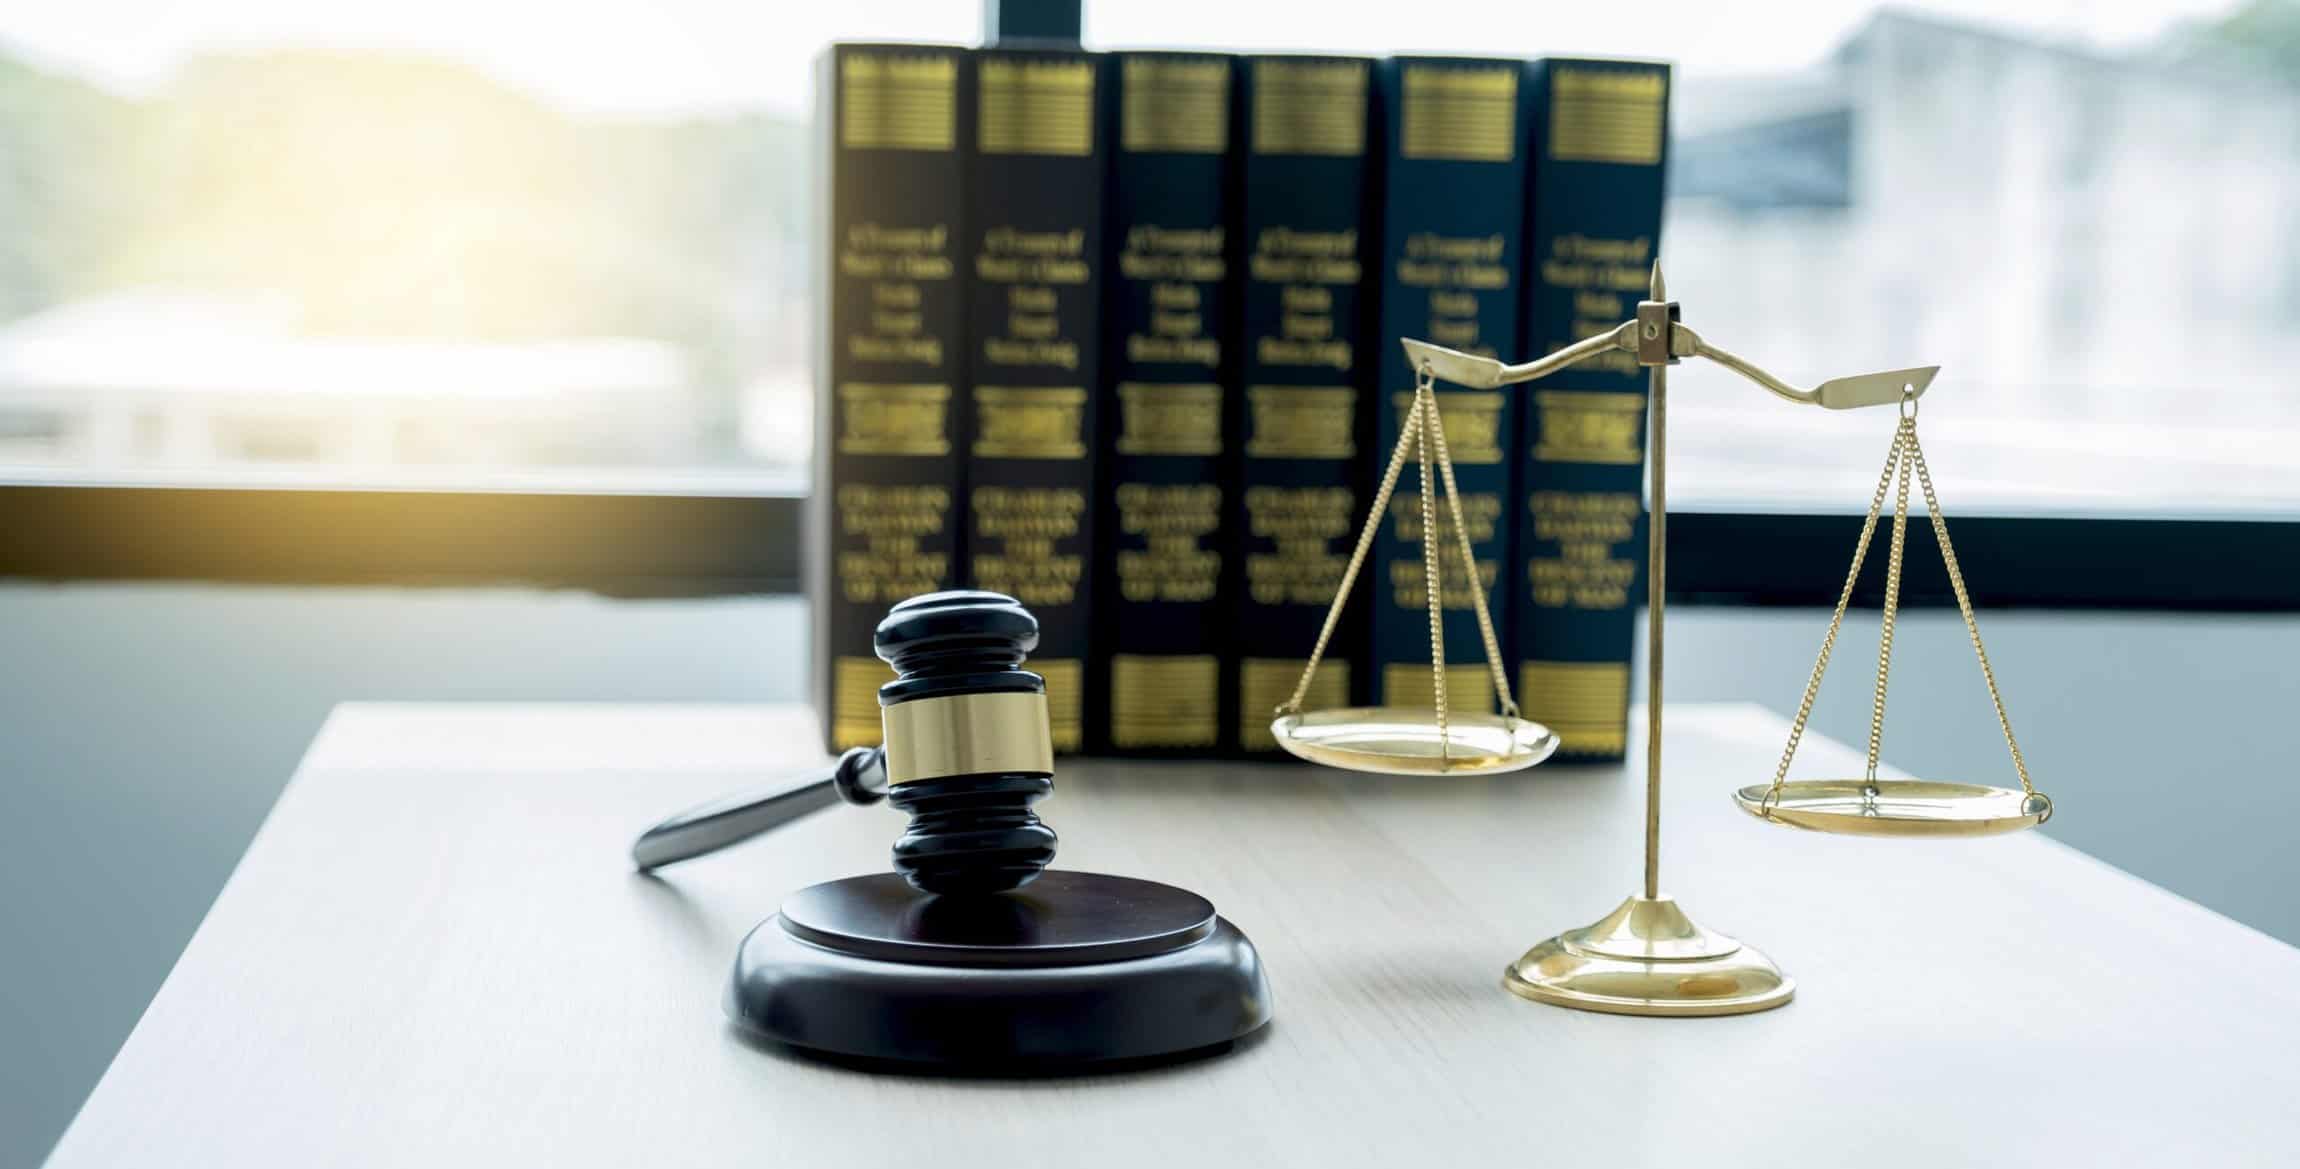 Gavel hammer, justice scale, and law textbook on table in lawyer office for providing legal consult business dispute service.